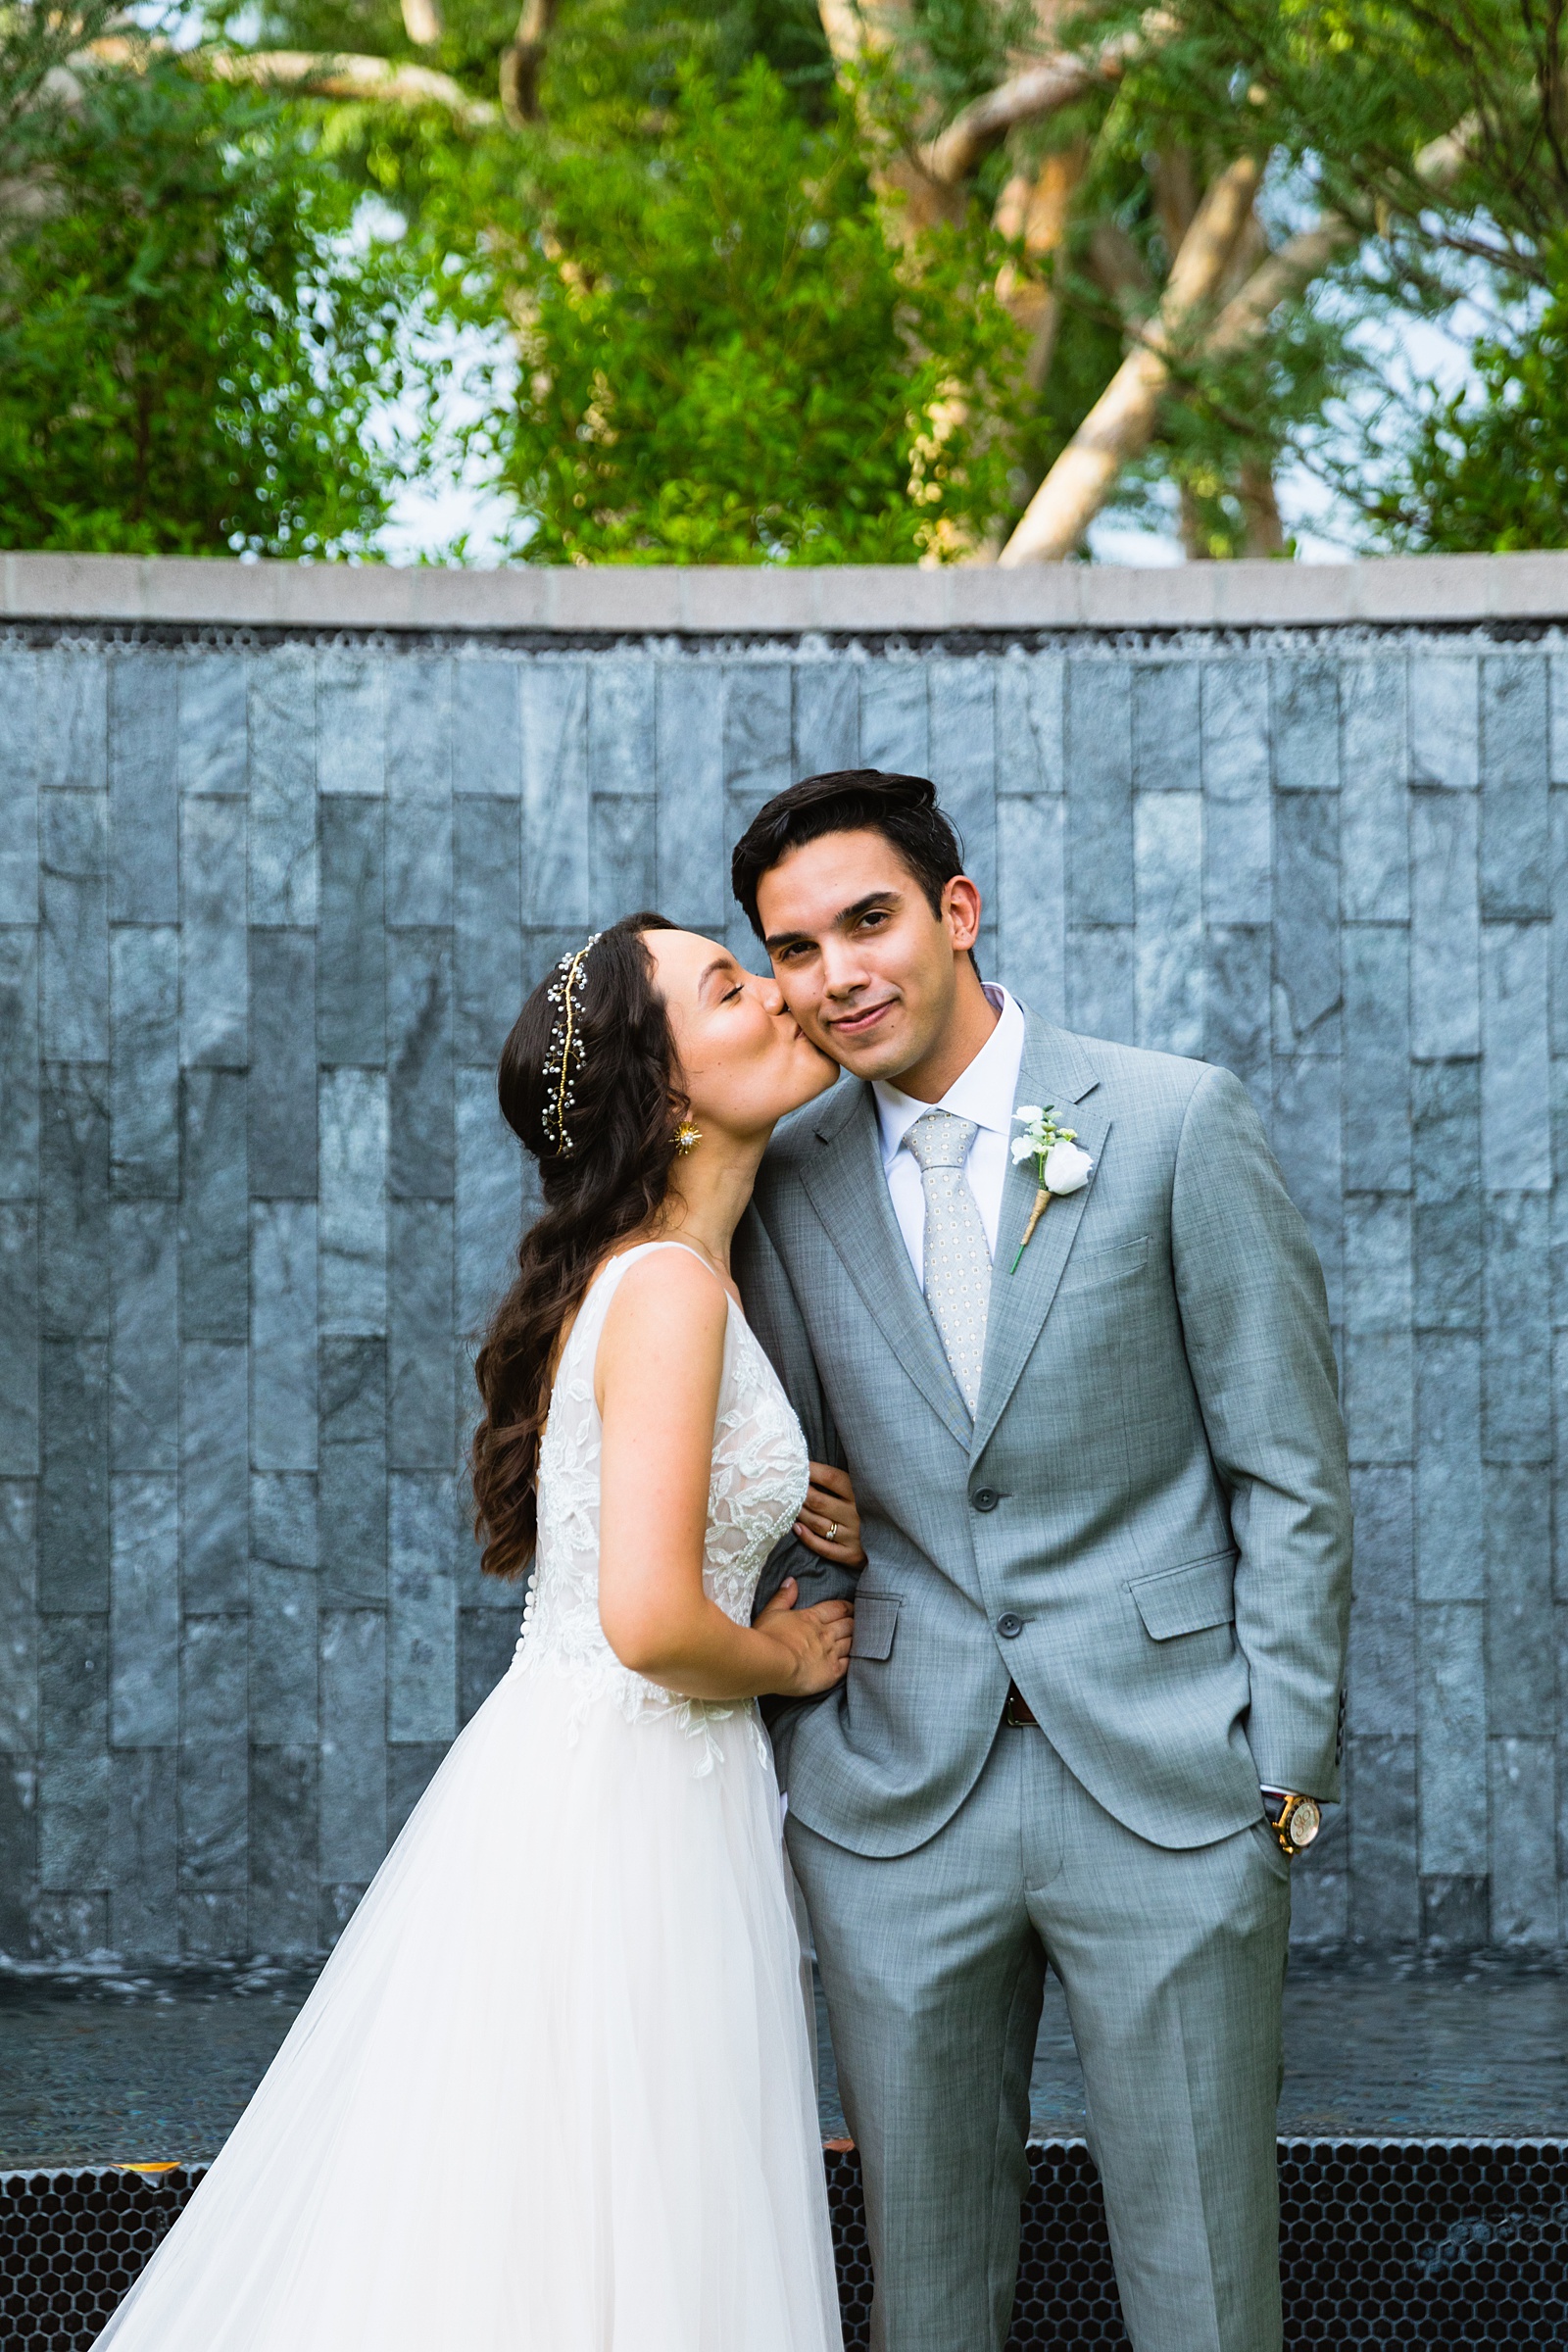 Bride and groom share a kiss during their Hyatt Regency Scottsdale Resort & Spa At Gainey Ranch wedding by Scottdsale wedding photographer PMA Photography.